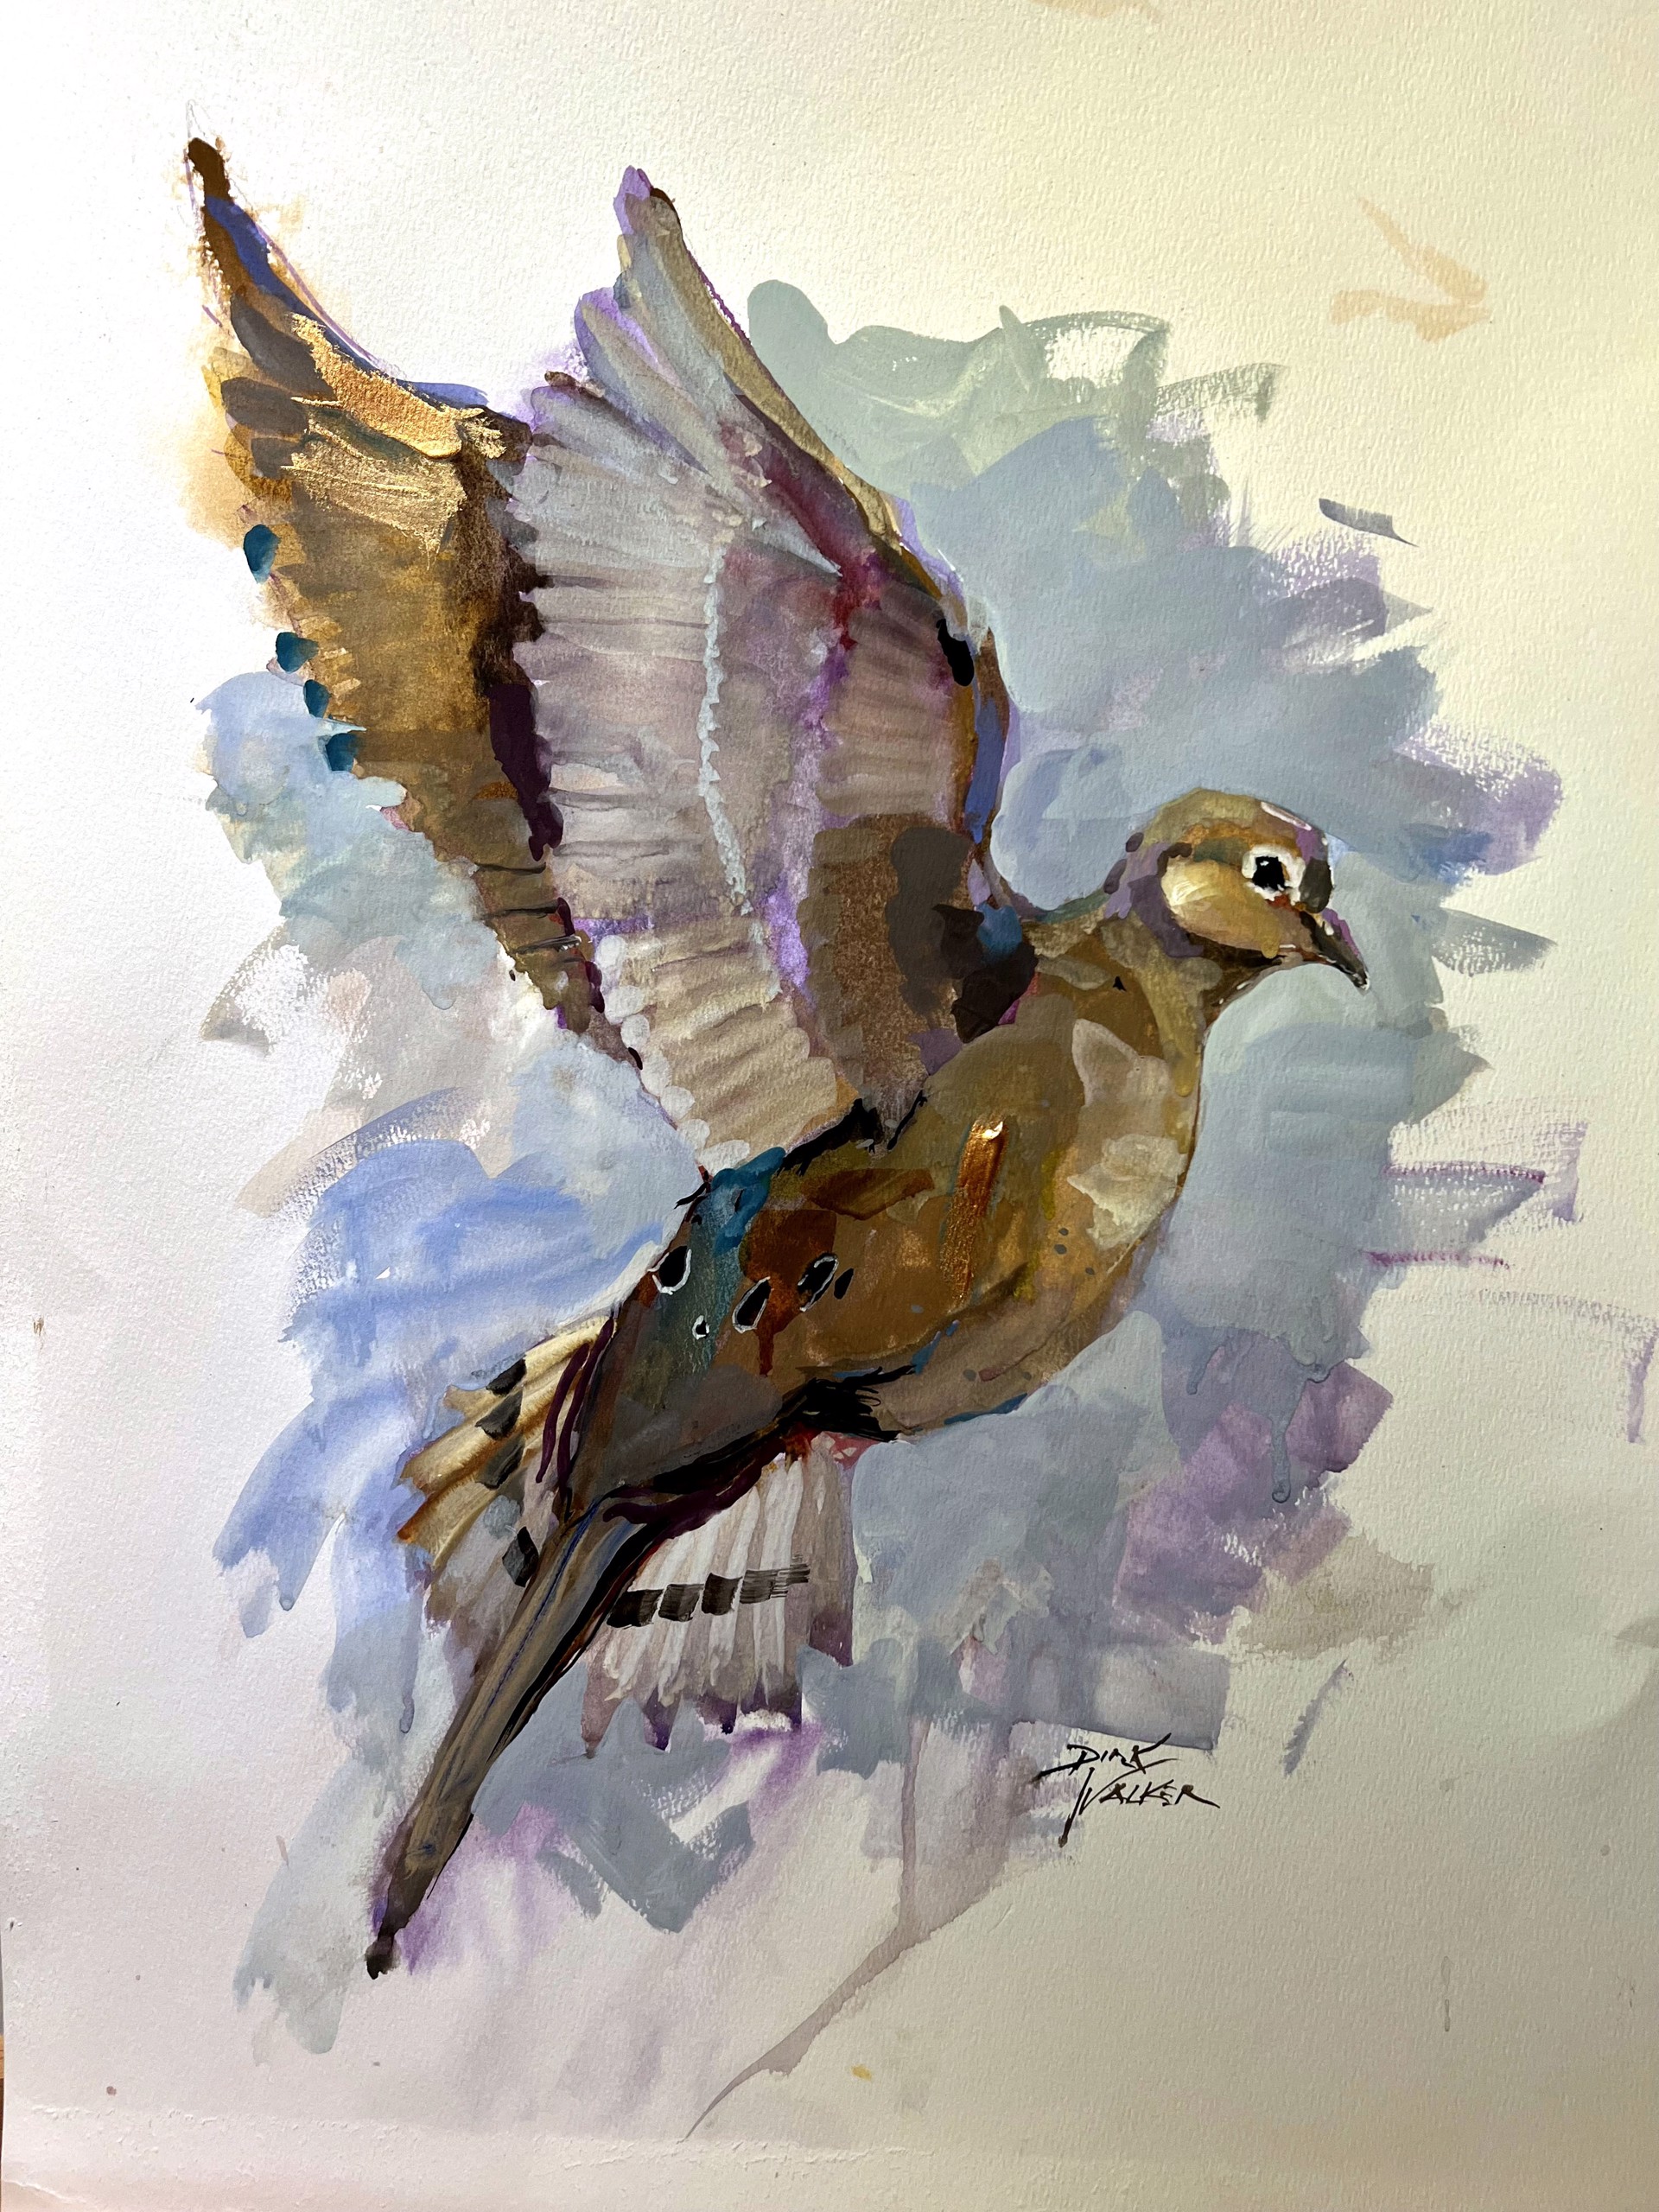 Soaring High - Mourning Dove by Dirk Walker